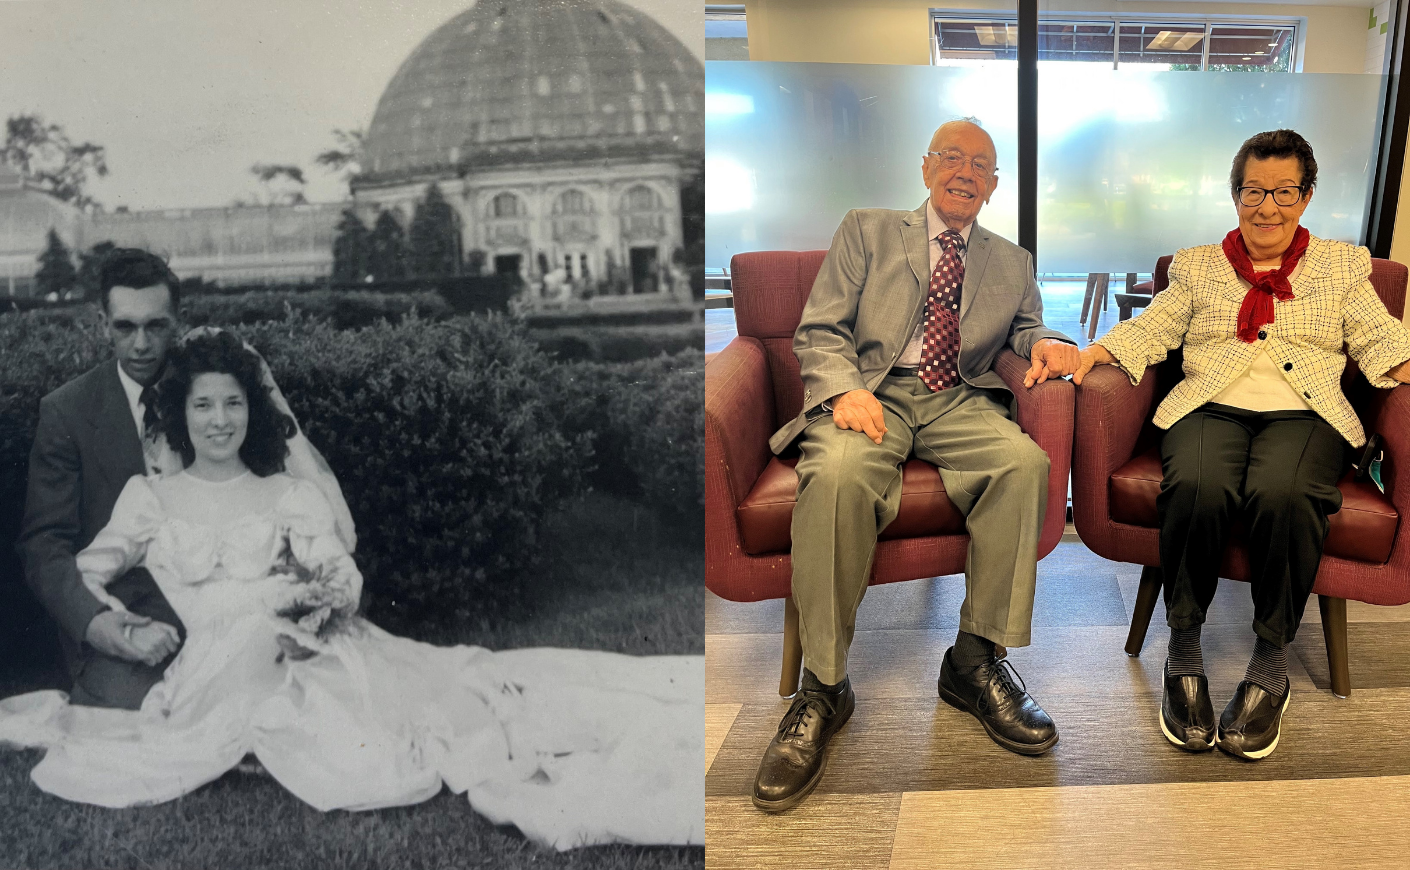 rosie and robert shaffer then and now